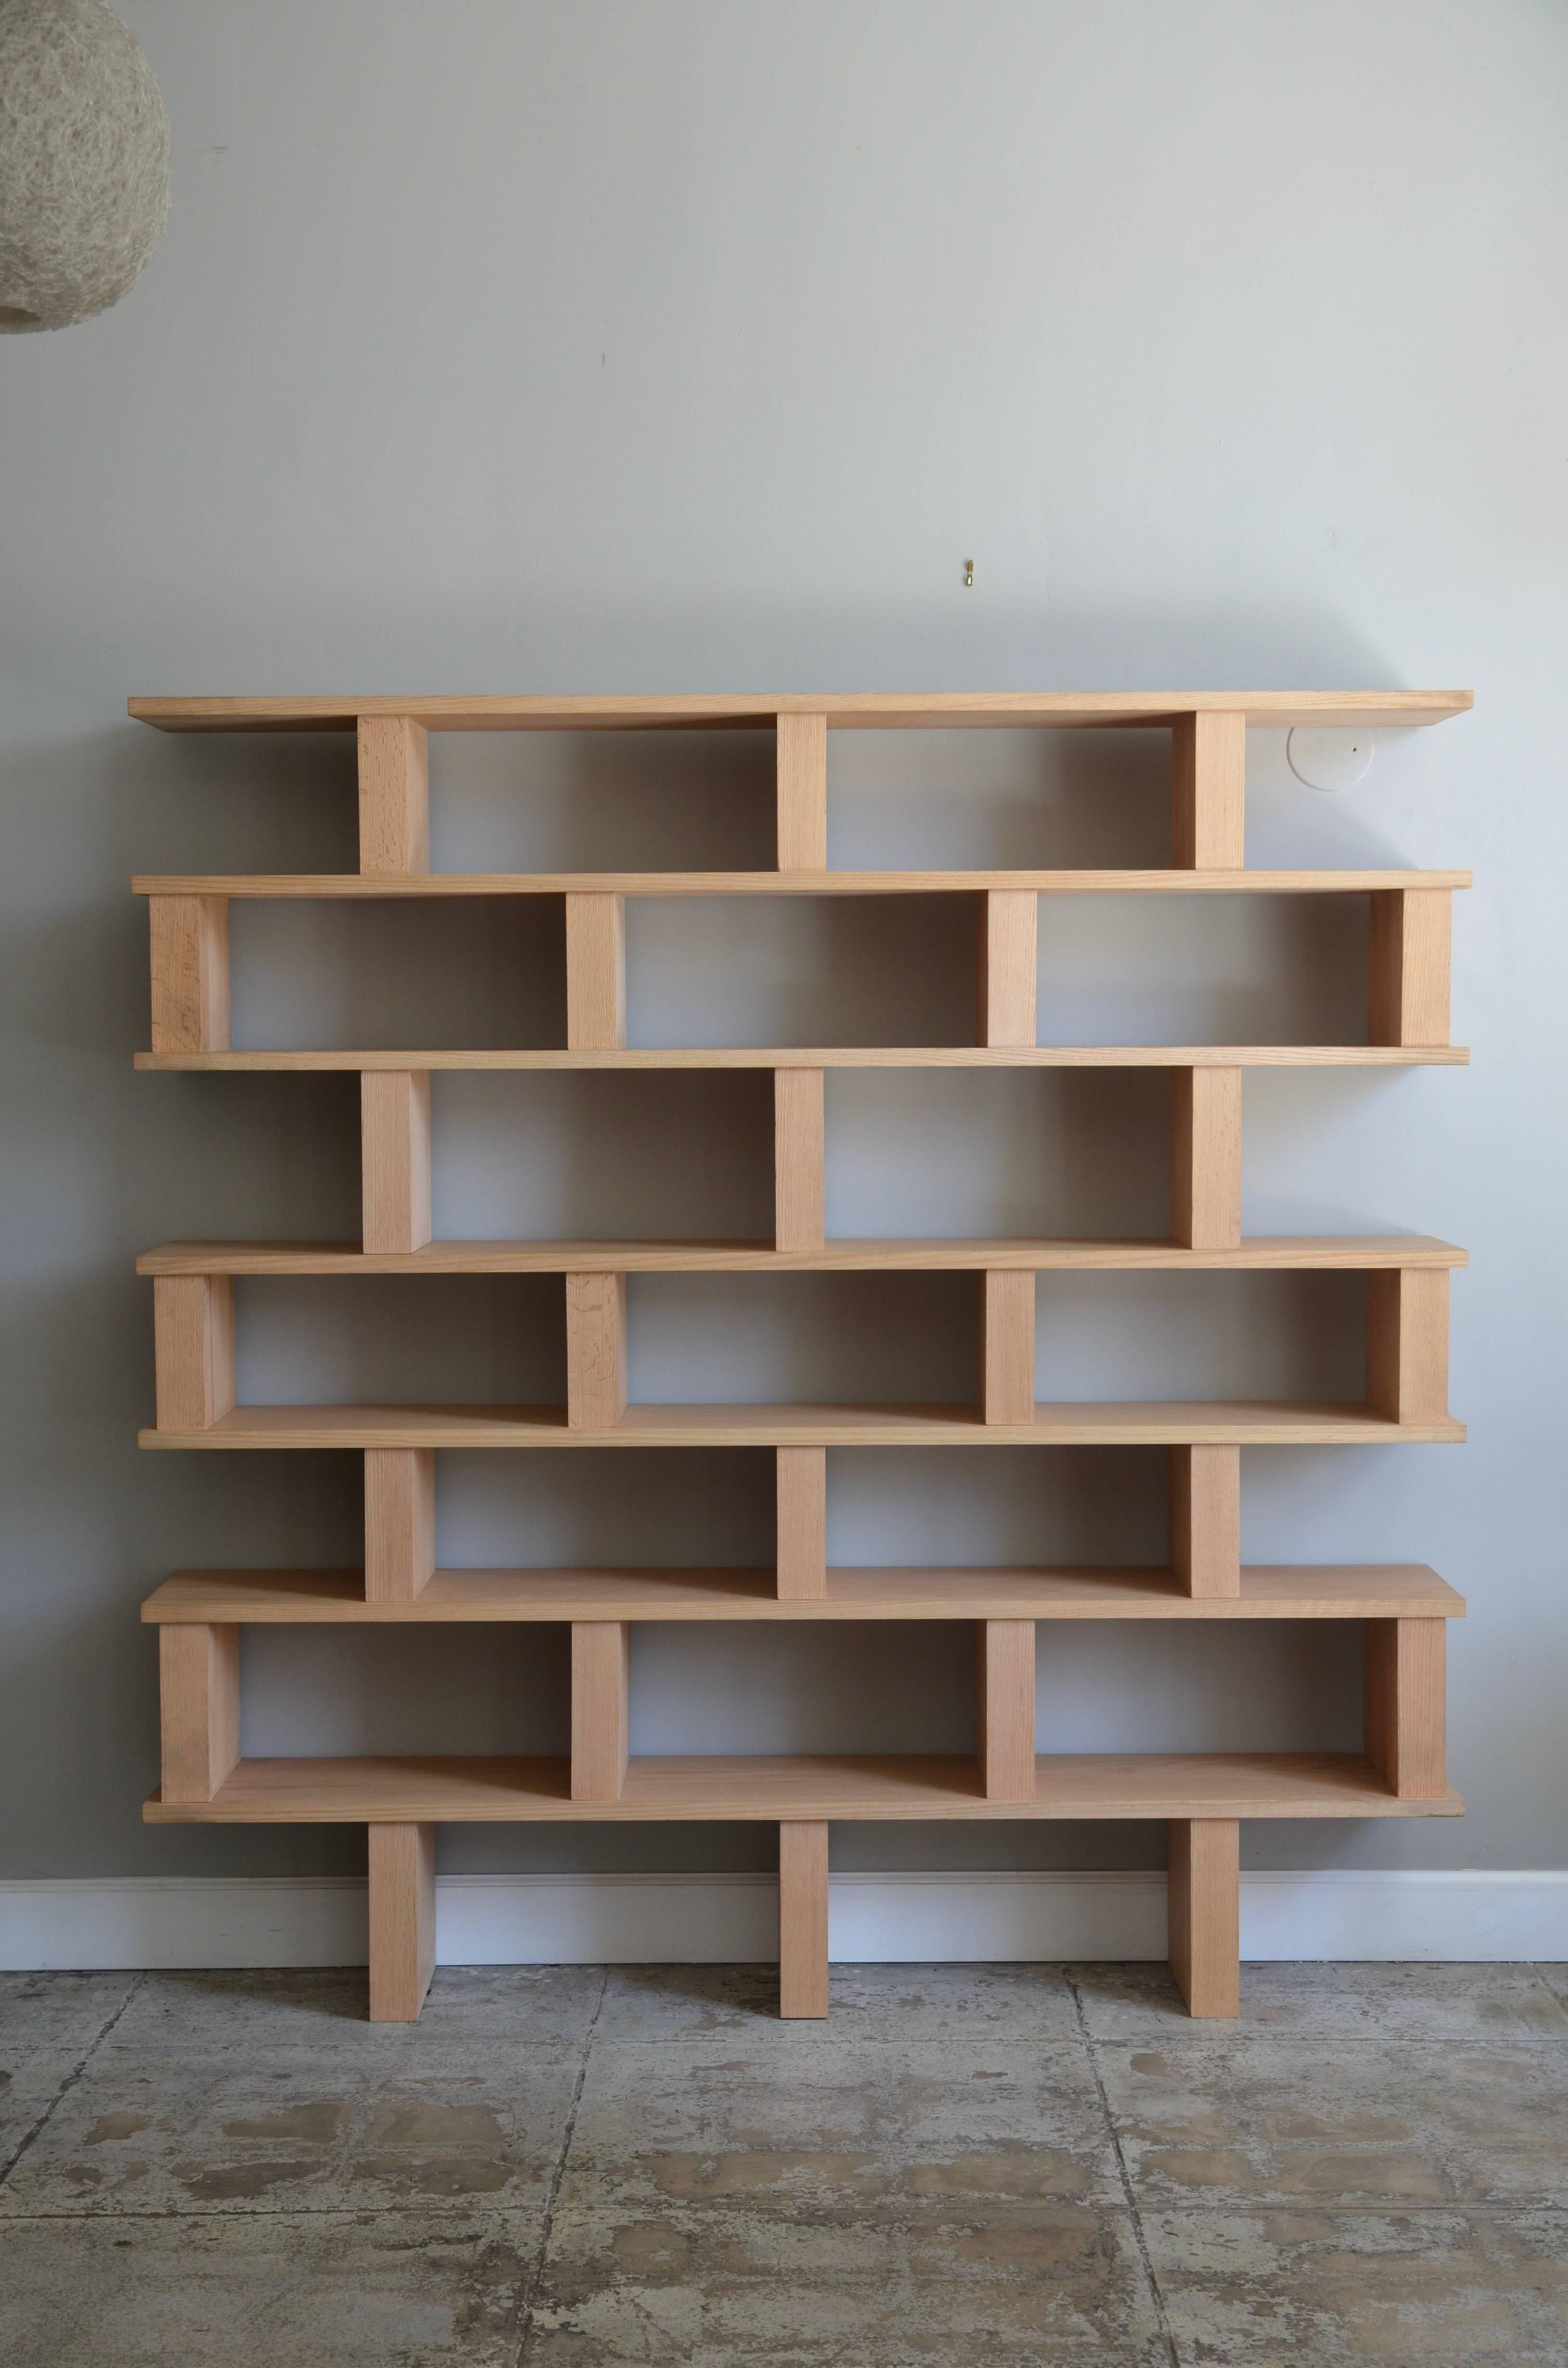 Chic 'Verticale' polished oak shelving unit by Design Frères.

Handmade in solid oak, polished and with a clear matte finish in our Los Angeles atelier.

Assembles in two parts for easy shipping and moving.

This shelving unit by Design Frères is